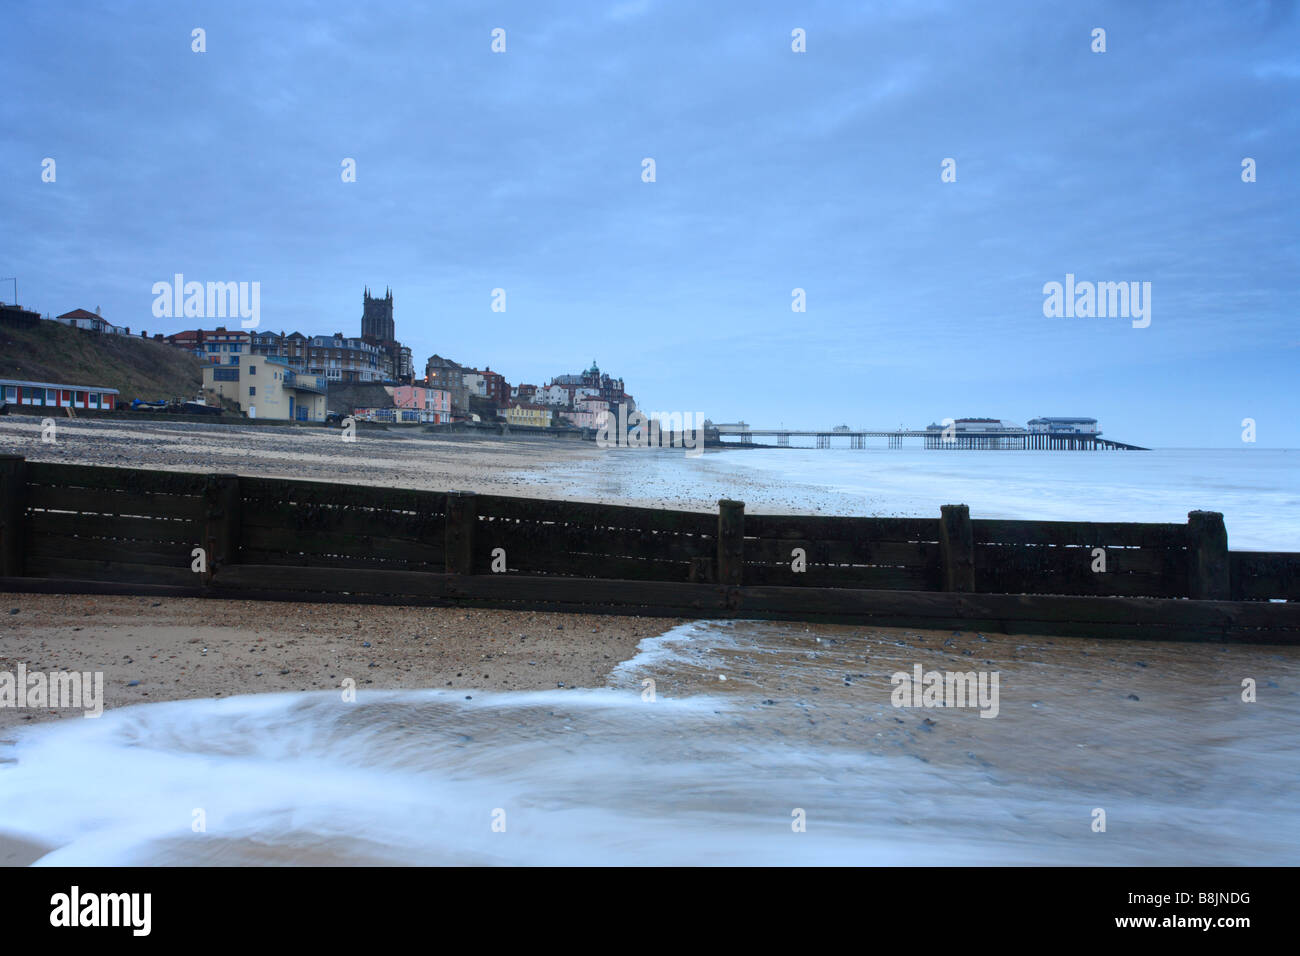 Wooden groyne on Cromer beach, wave breaking on the shore, Cromer seaside town and pier in the distance. Stock Photo